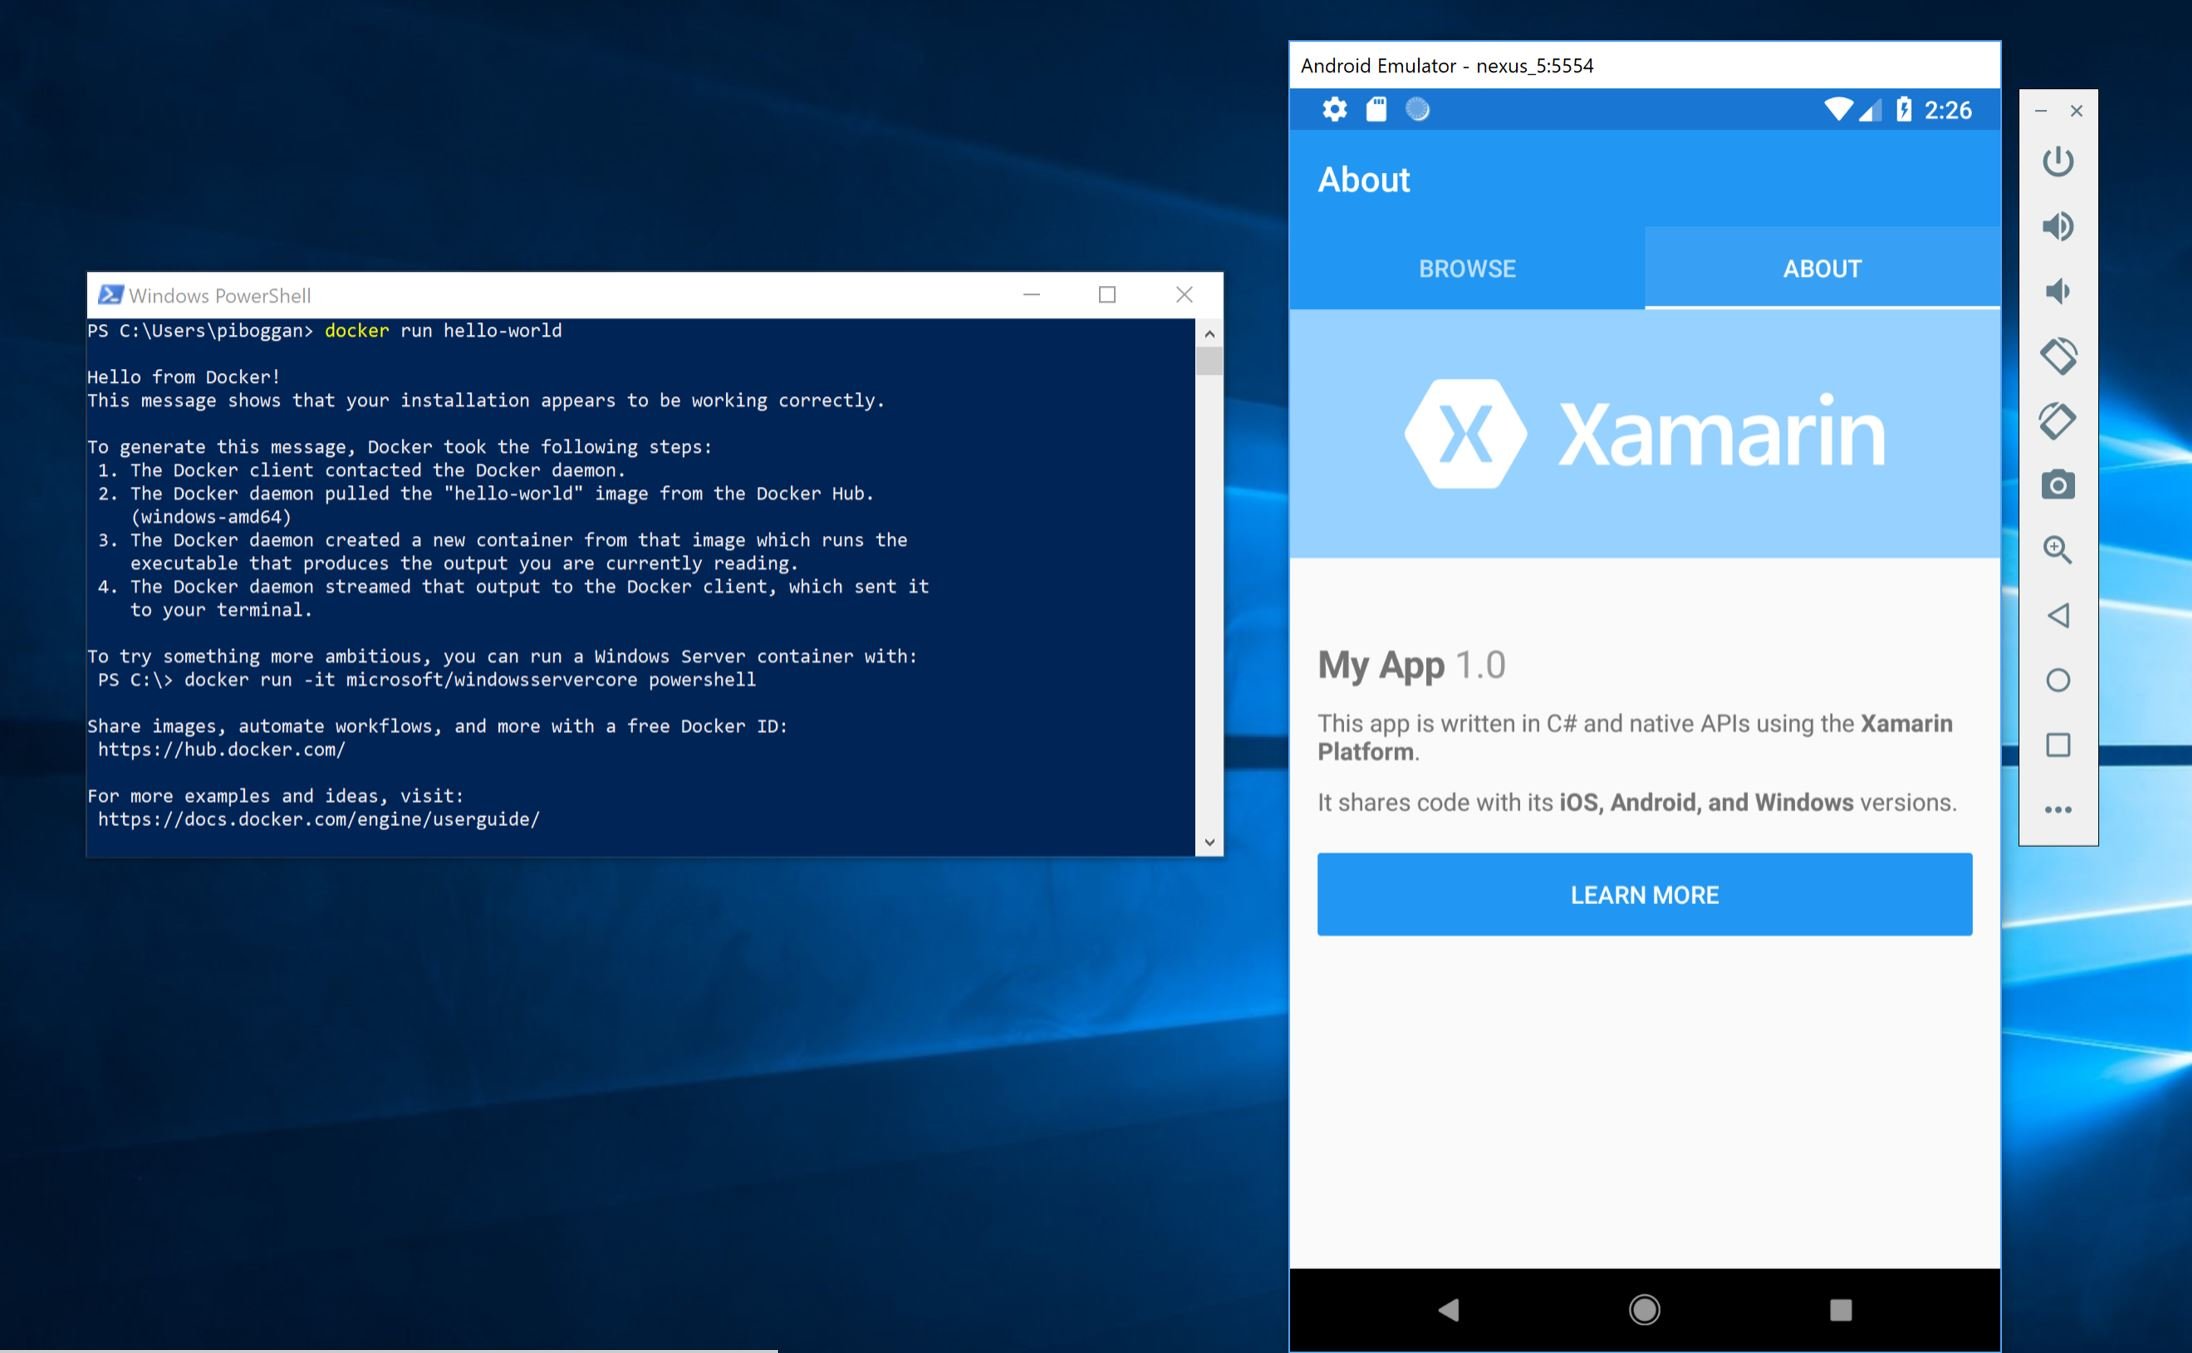 Microsoft announces Google Android emulator that’s compatible with Hyper-V